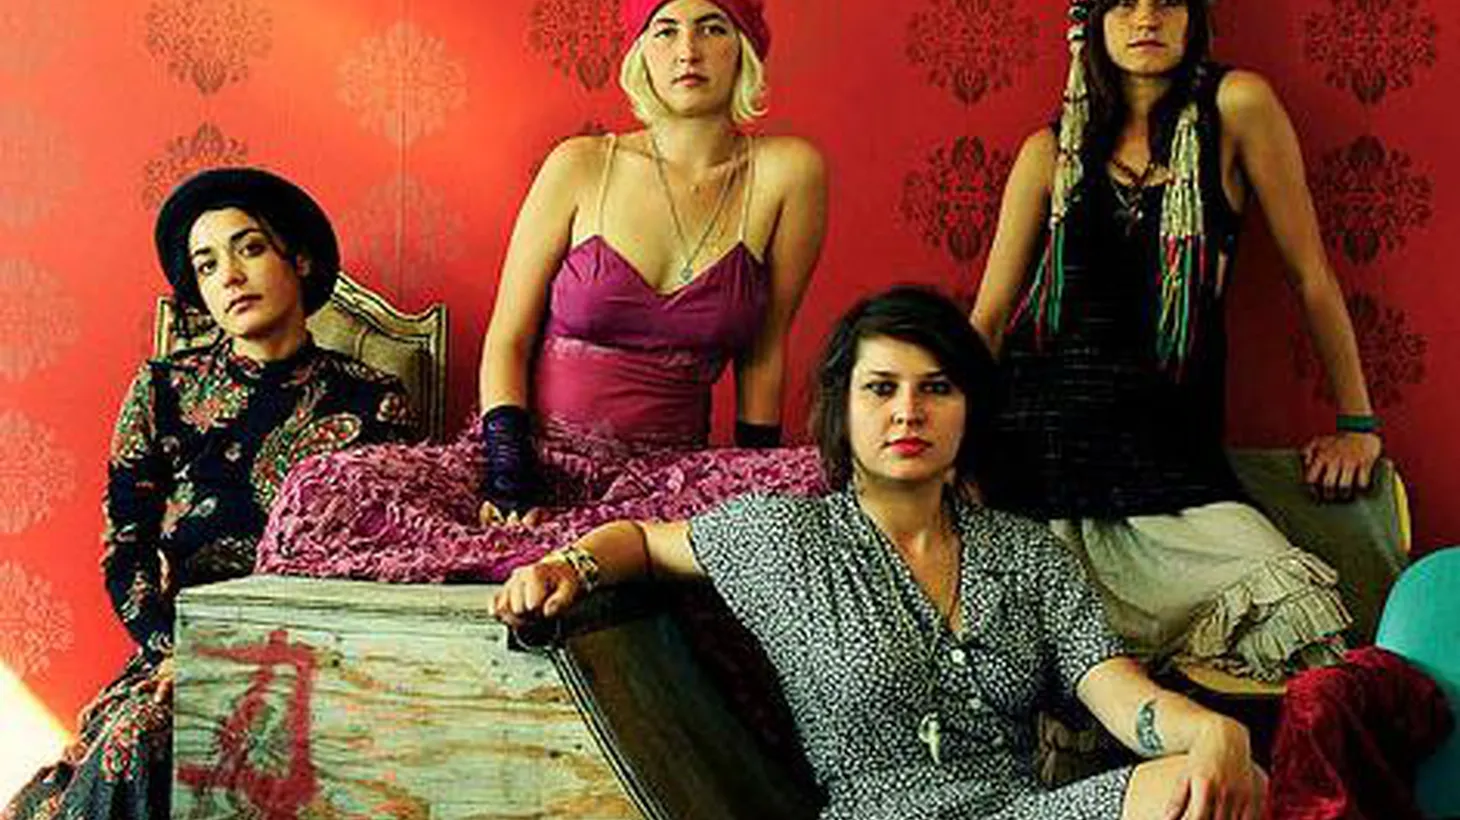 The ladies who make up LA's Warpaint have been getting a lot of attention and rave reviews for their music. KCRW DJ's have been on the frontlines sharing those songs, and we can't wait to hear them live on Morning Becomes Eclectic at 11:15am.